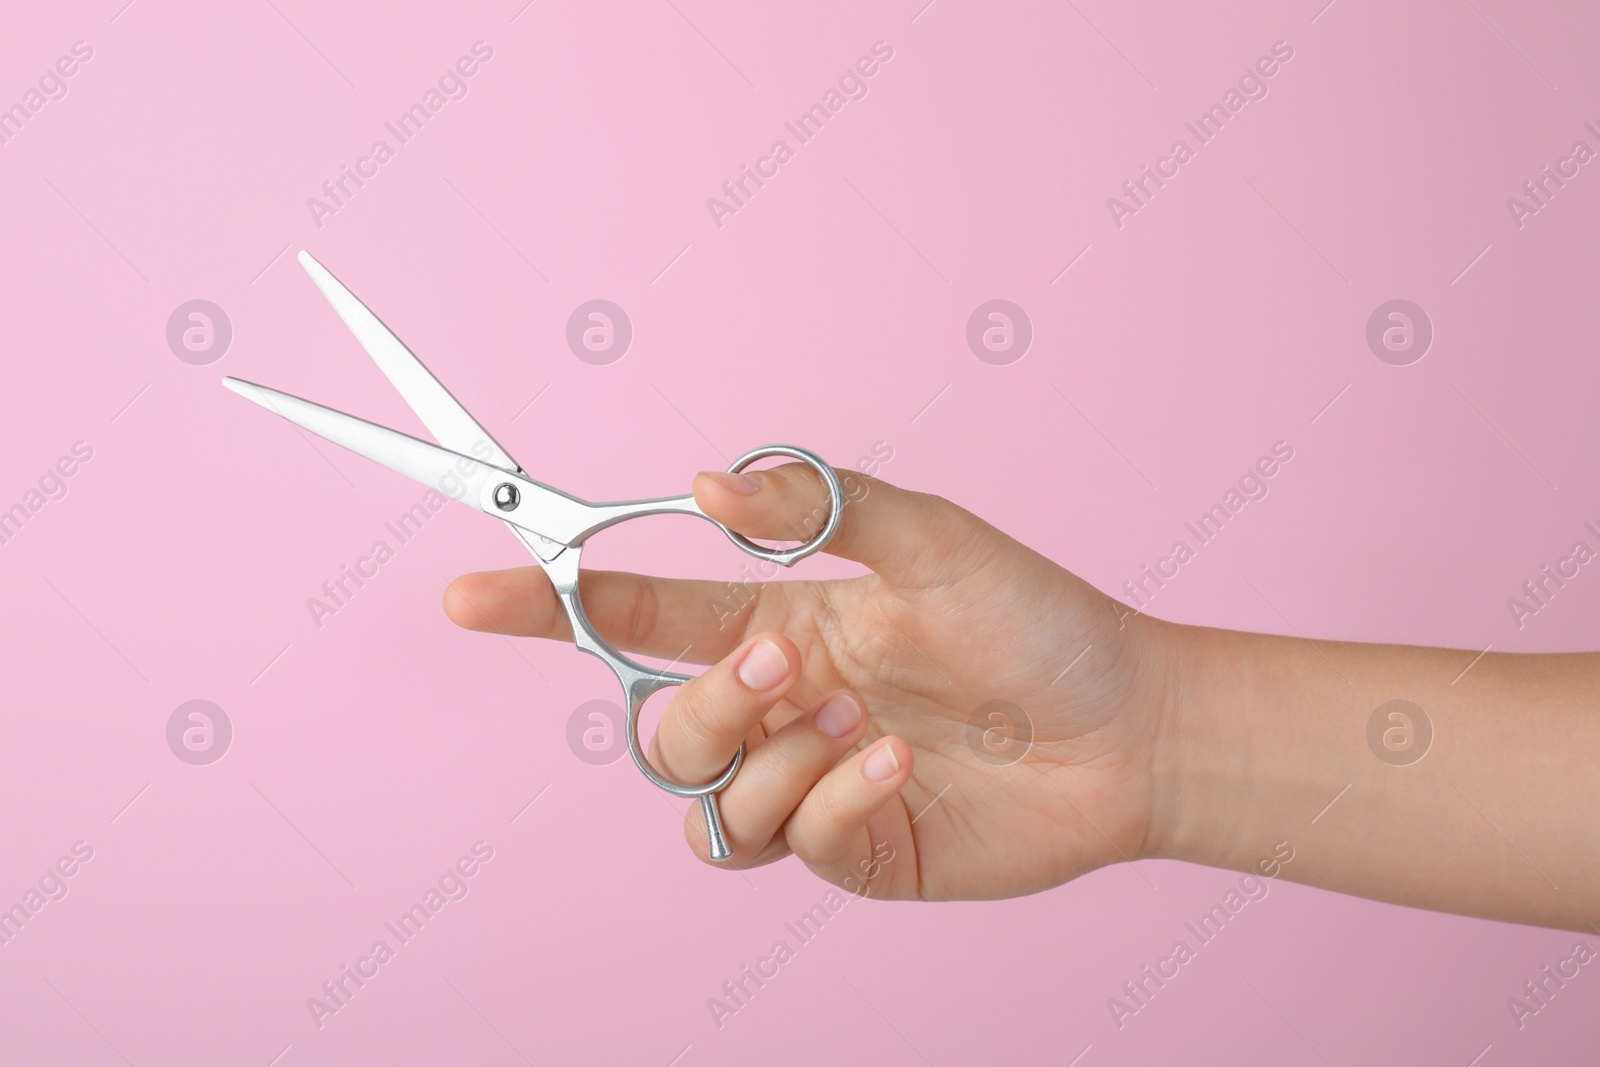 Photo of Hairdresser holding professional scissors on pink background, closeup. Haircut tool